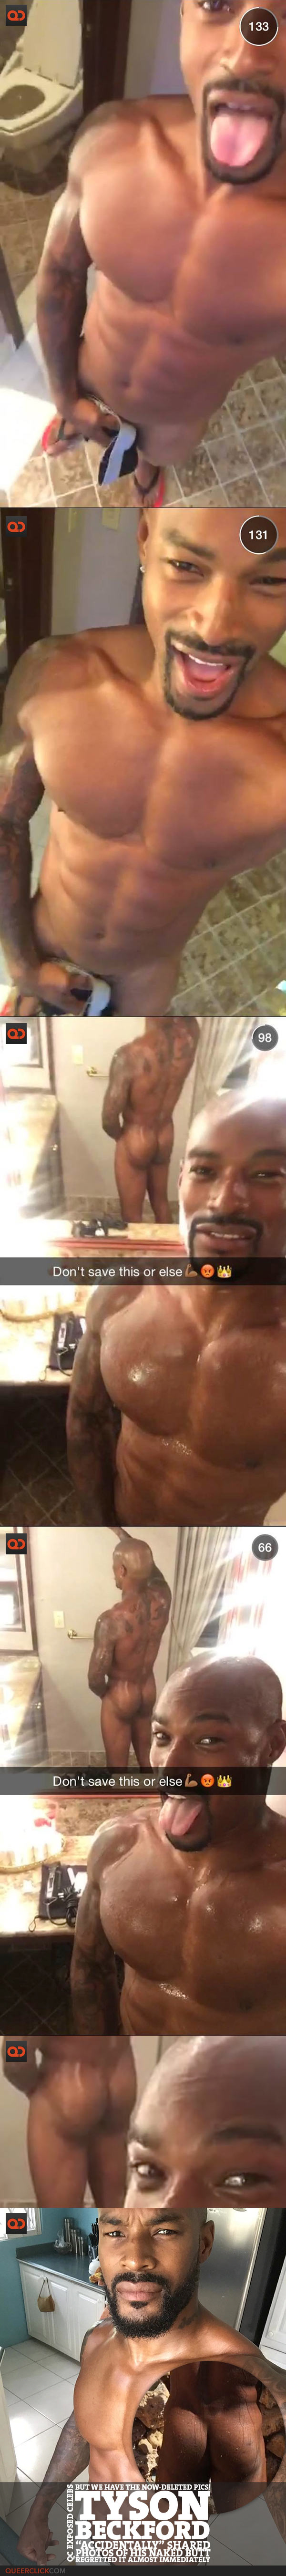 Tyson Beckford “Accidentally” Shared Photos Of His Naked Butt, Regretted It Almost Immediately - But We Have The Now-Deleted Pics!